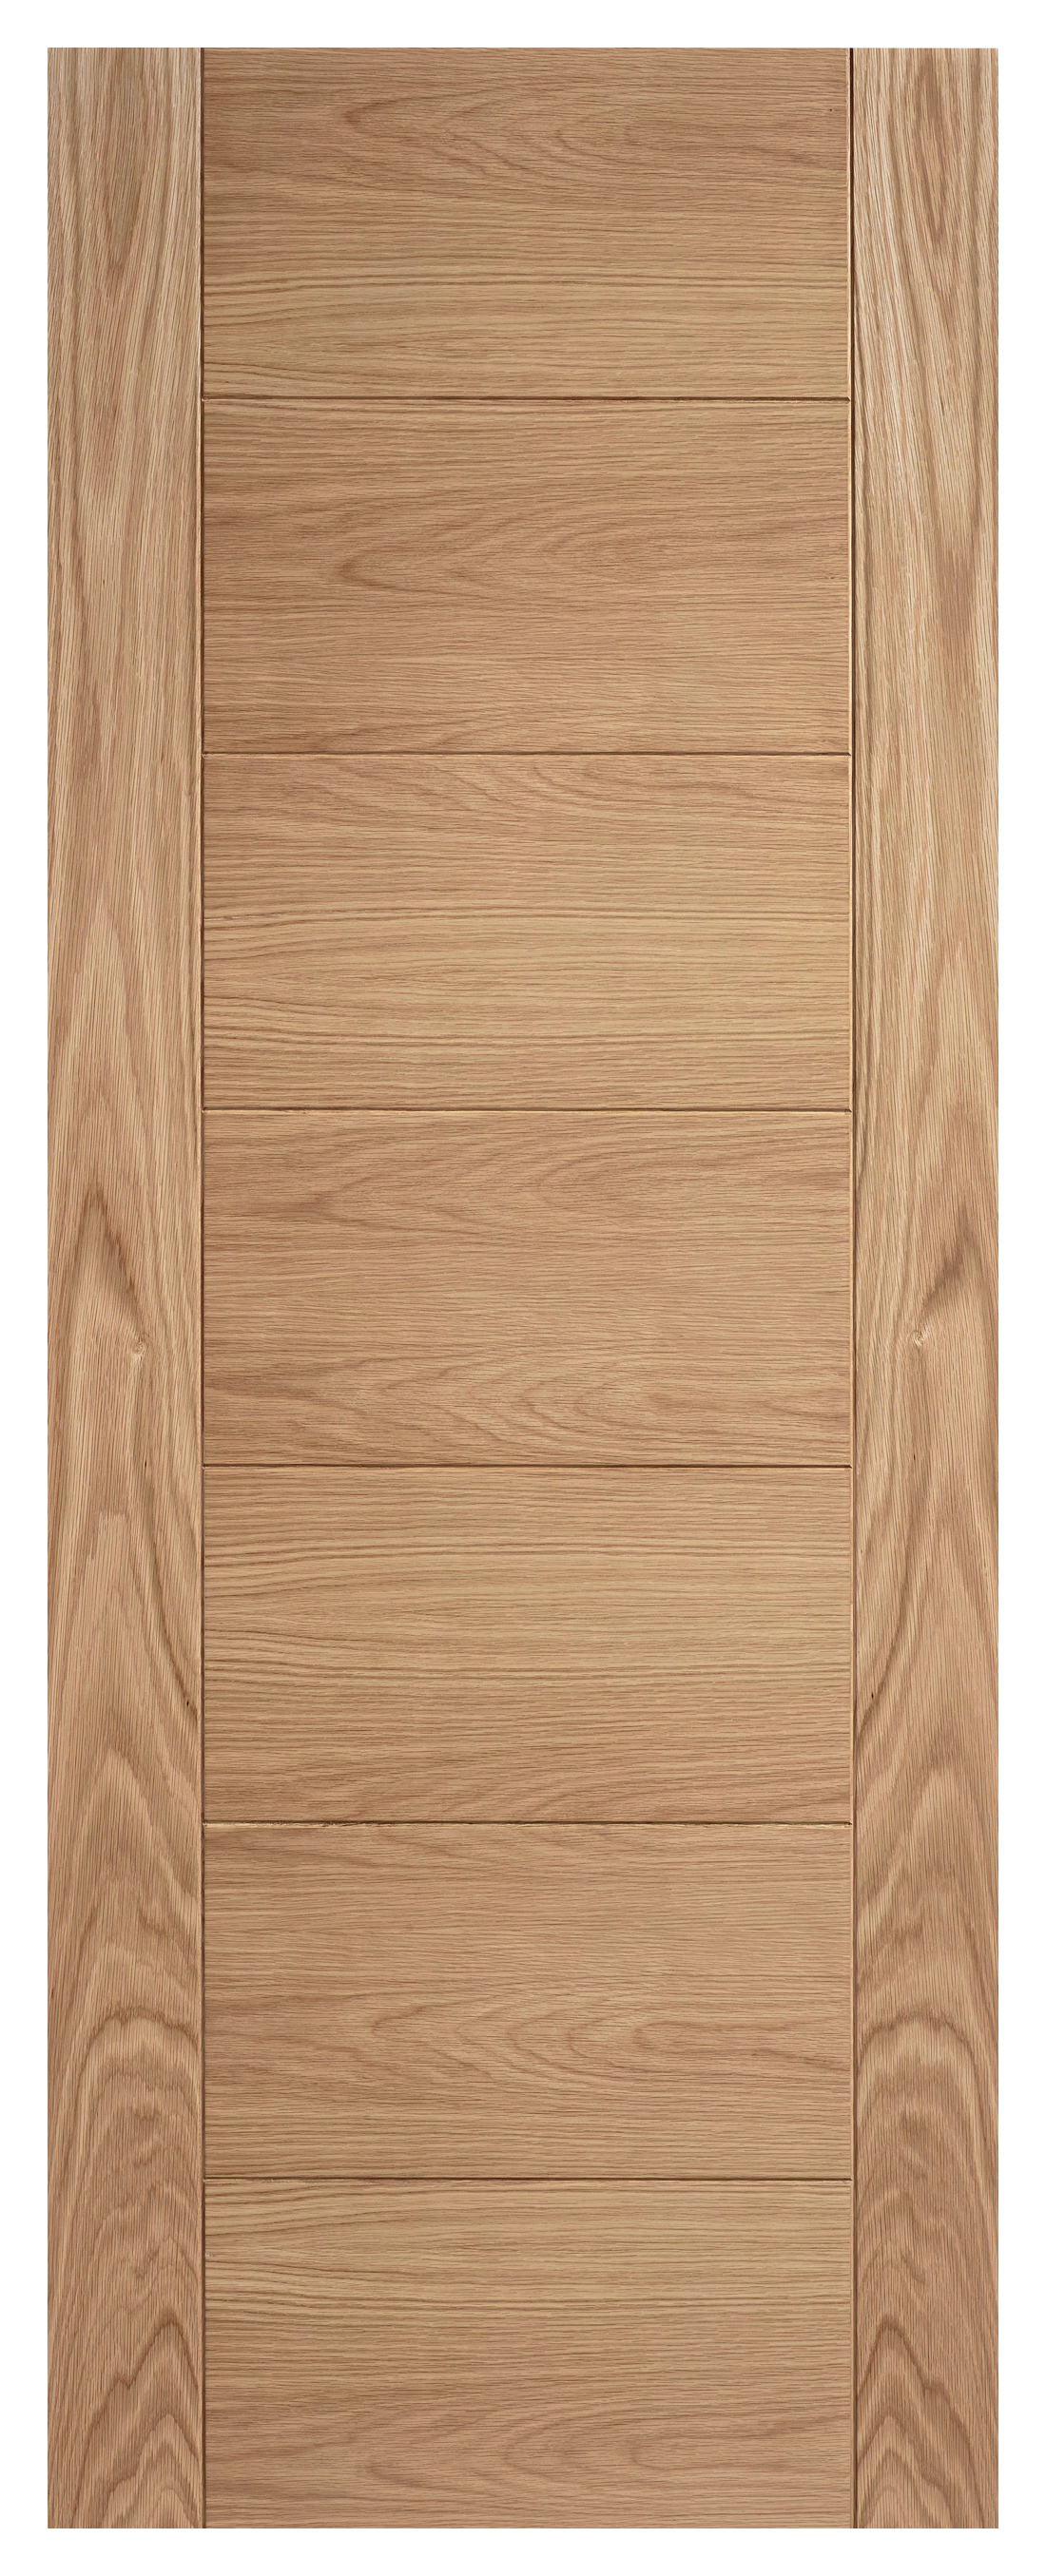 Image of LPD Internal Carini 7 Panel Pre-Finished Oak Solid Core Door - 533 x 1981mm